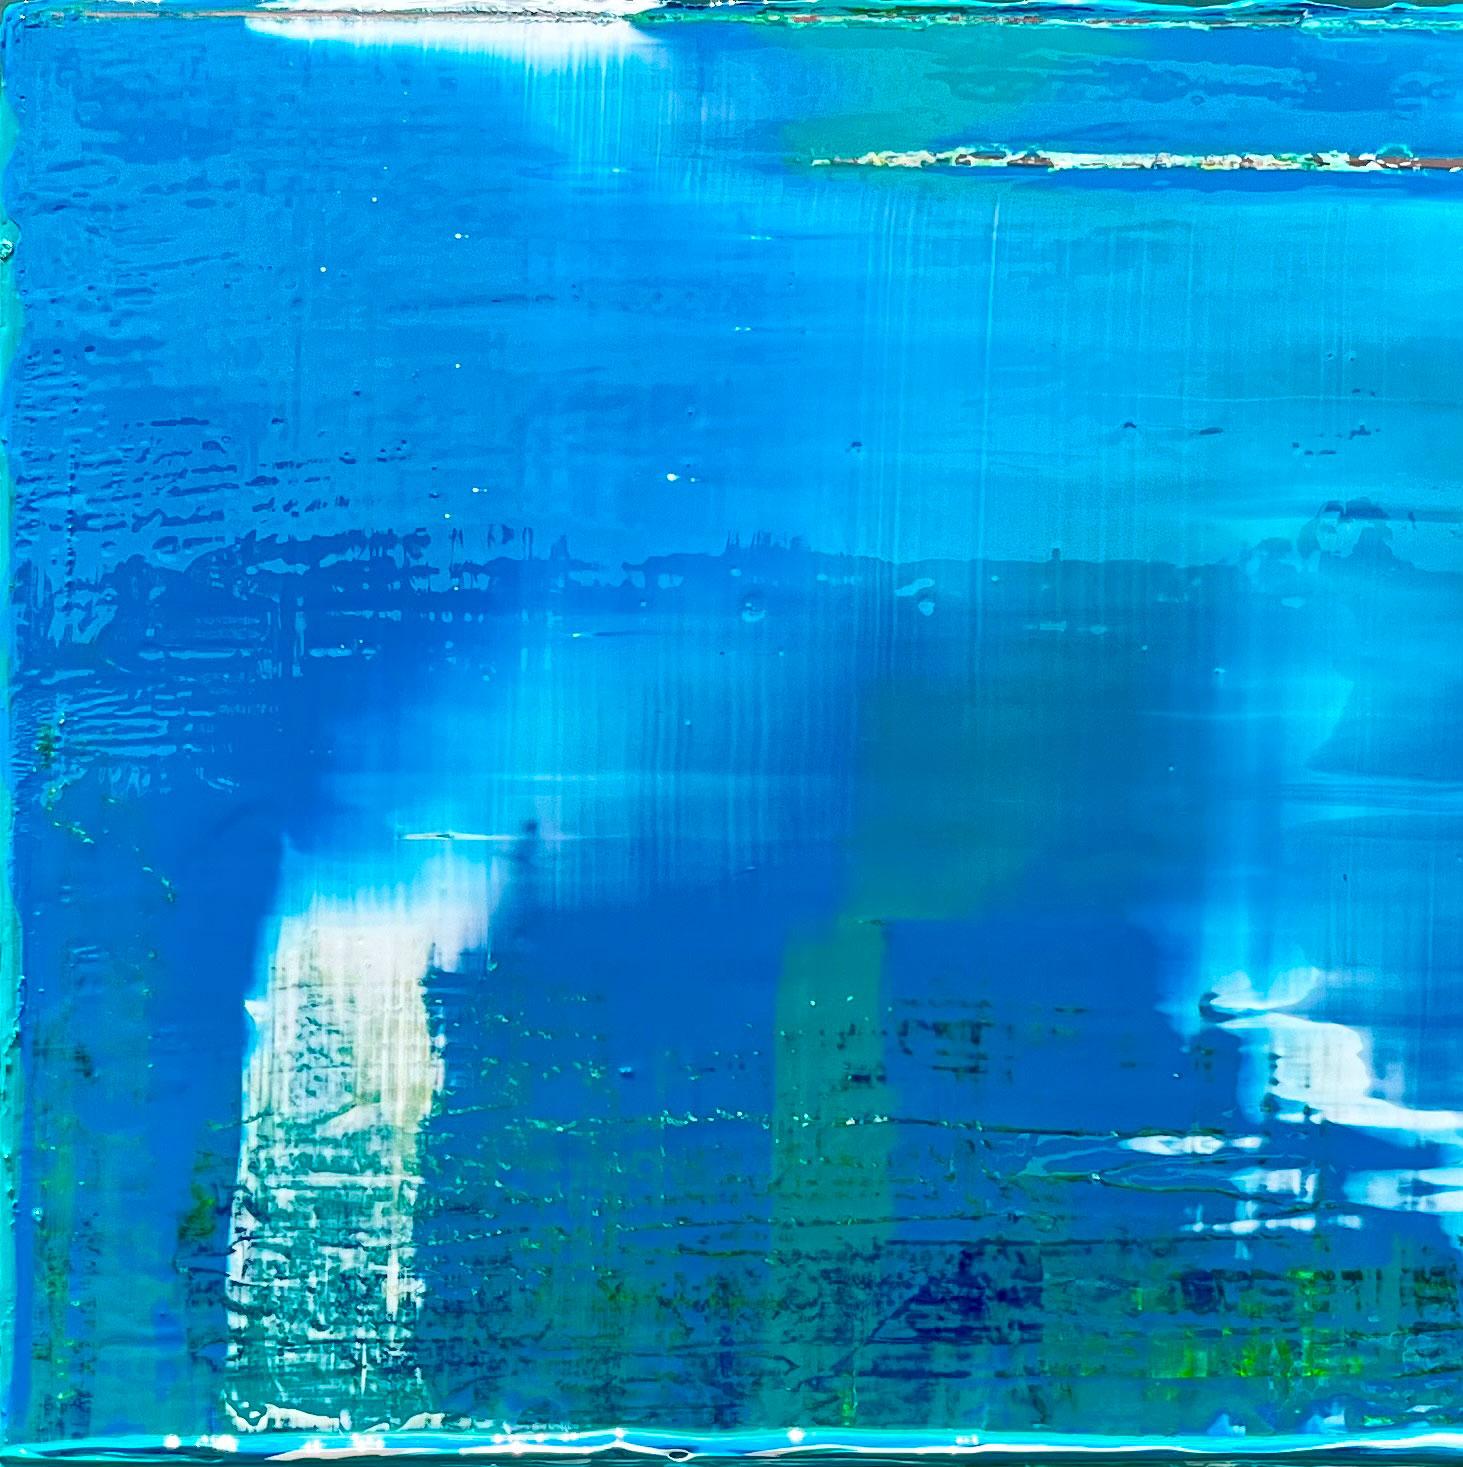 Climate Change - Miami - Abstract Painting by Antonio Franchi